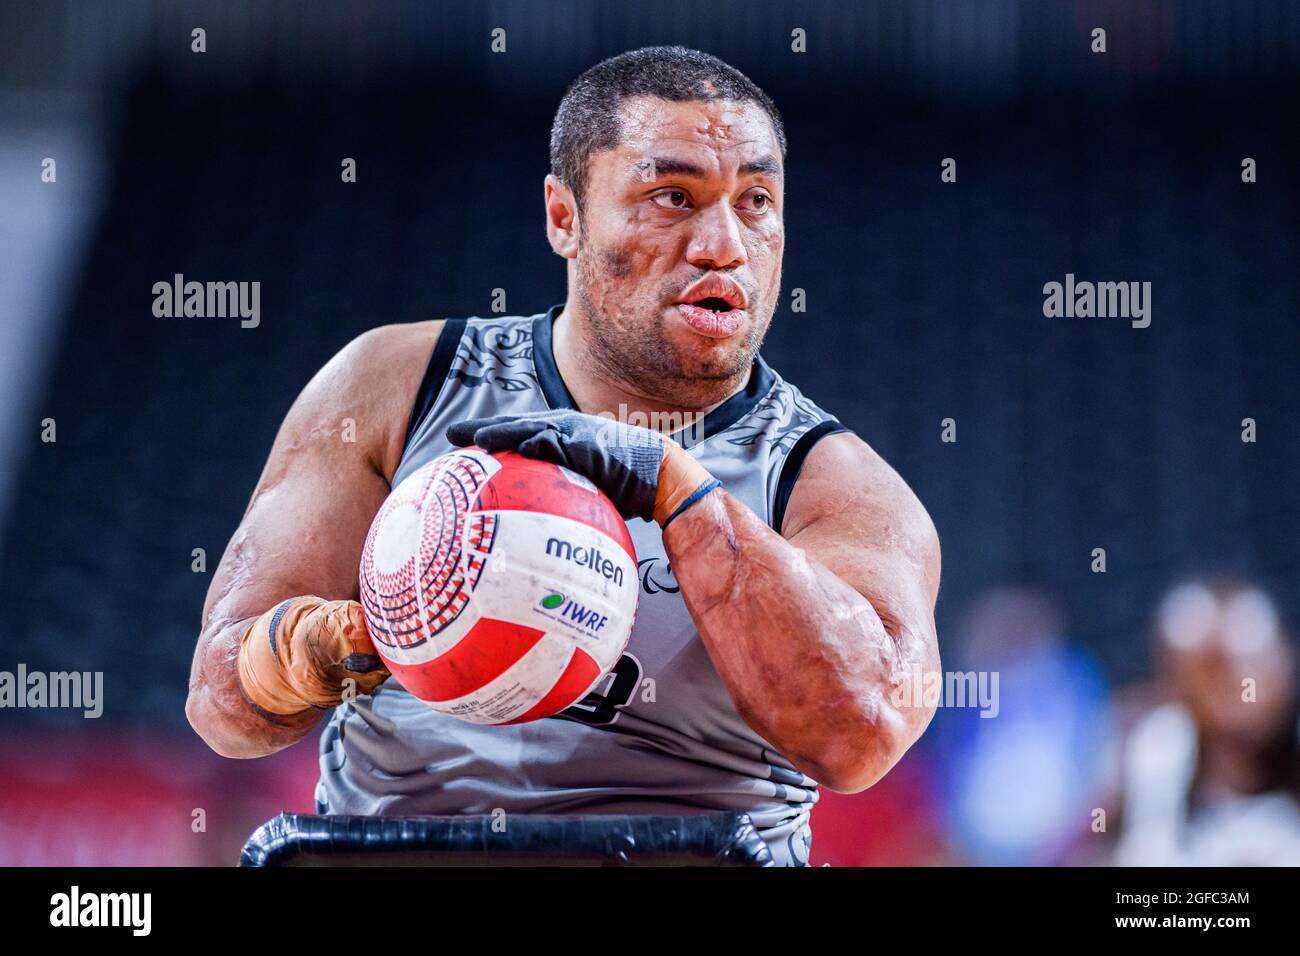 TOKYO, JAPAN. 25th Aug, 2021. Barney Koneferenishi (NZL) in Men's Wheelchair Basketball USA vs NZL during the Tokyo 2020 Paralympic Games at Yoyogi National Stadium on Wednesday, August 25, 2021 in TOKYO, JAPAN. Credit: Taka G Wu/Alamy Live News Stock Photo